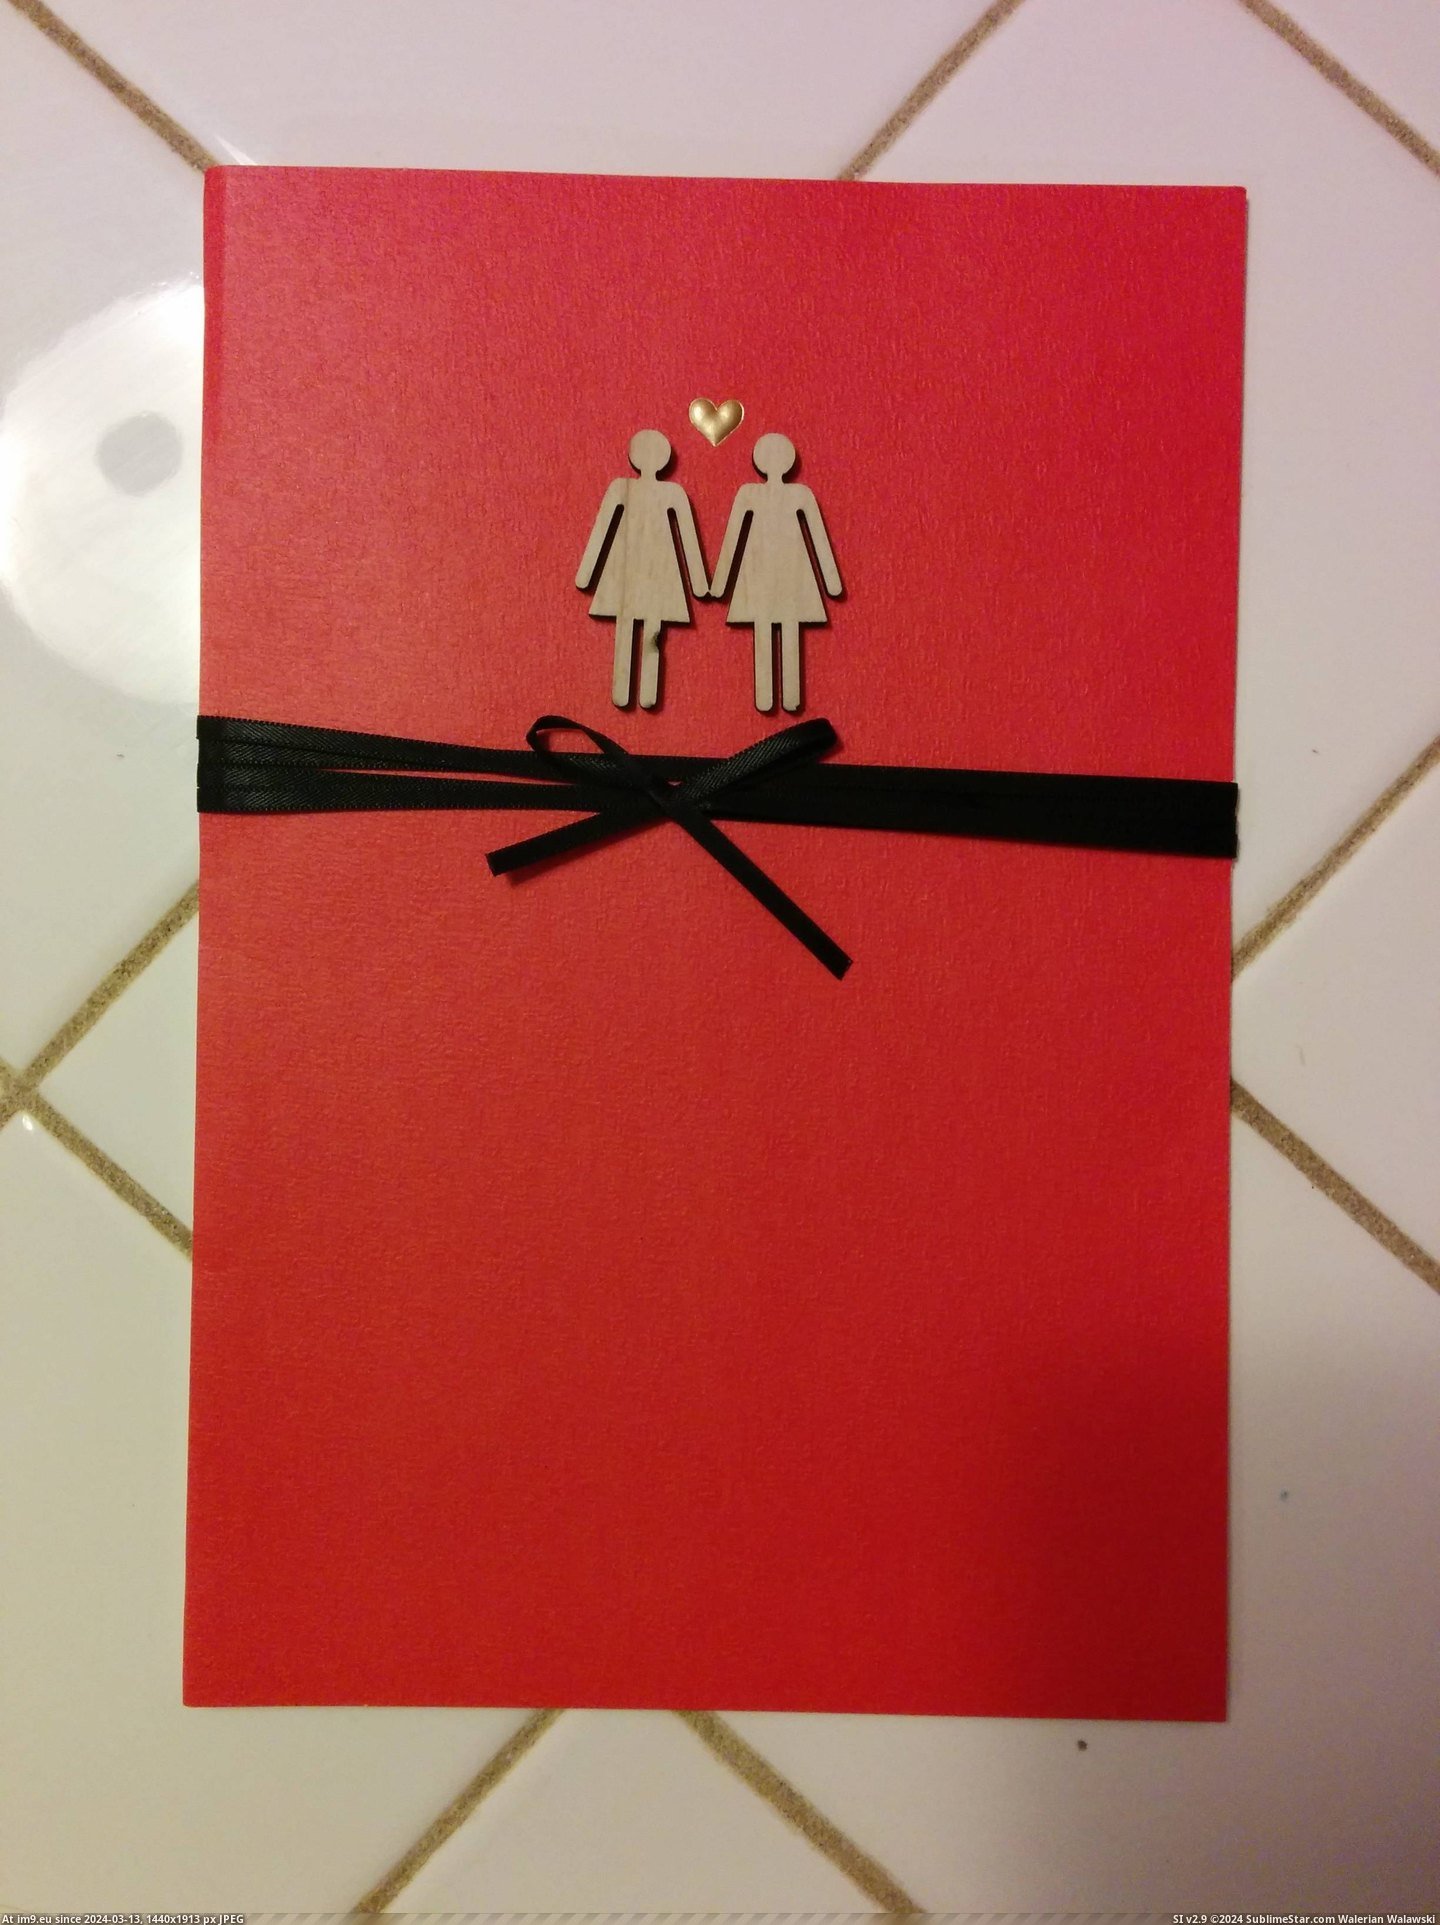 #Wife #Man #Lesbian #Valentines #Welp #Bought #Card #Realized [Mildlyinteresting] Welp, just realized I bought a lesbian Valentines Card for my wife (I'm a man) Pic. (Image of album My r/MILDLYINTERESTING favs))